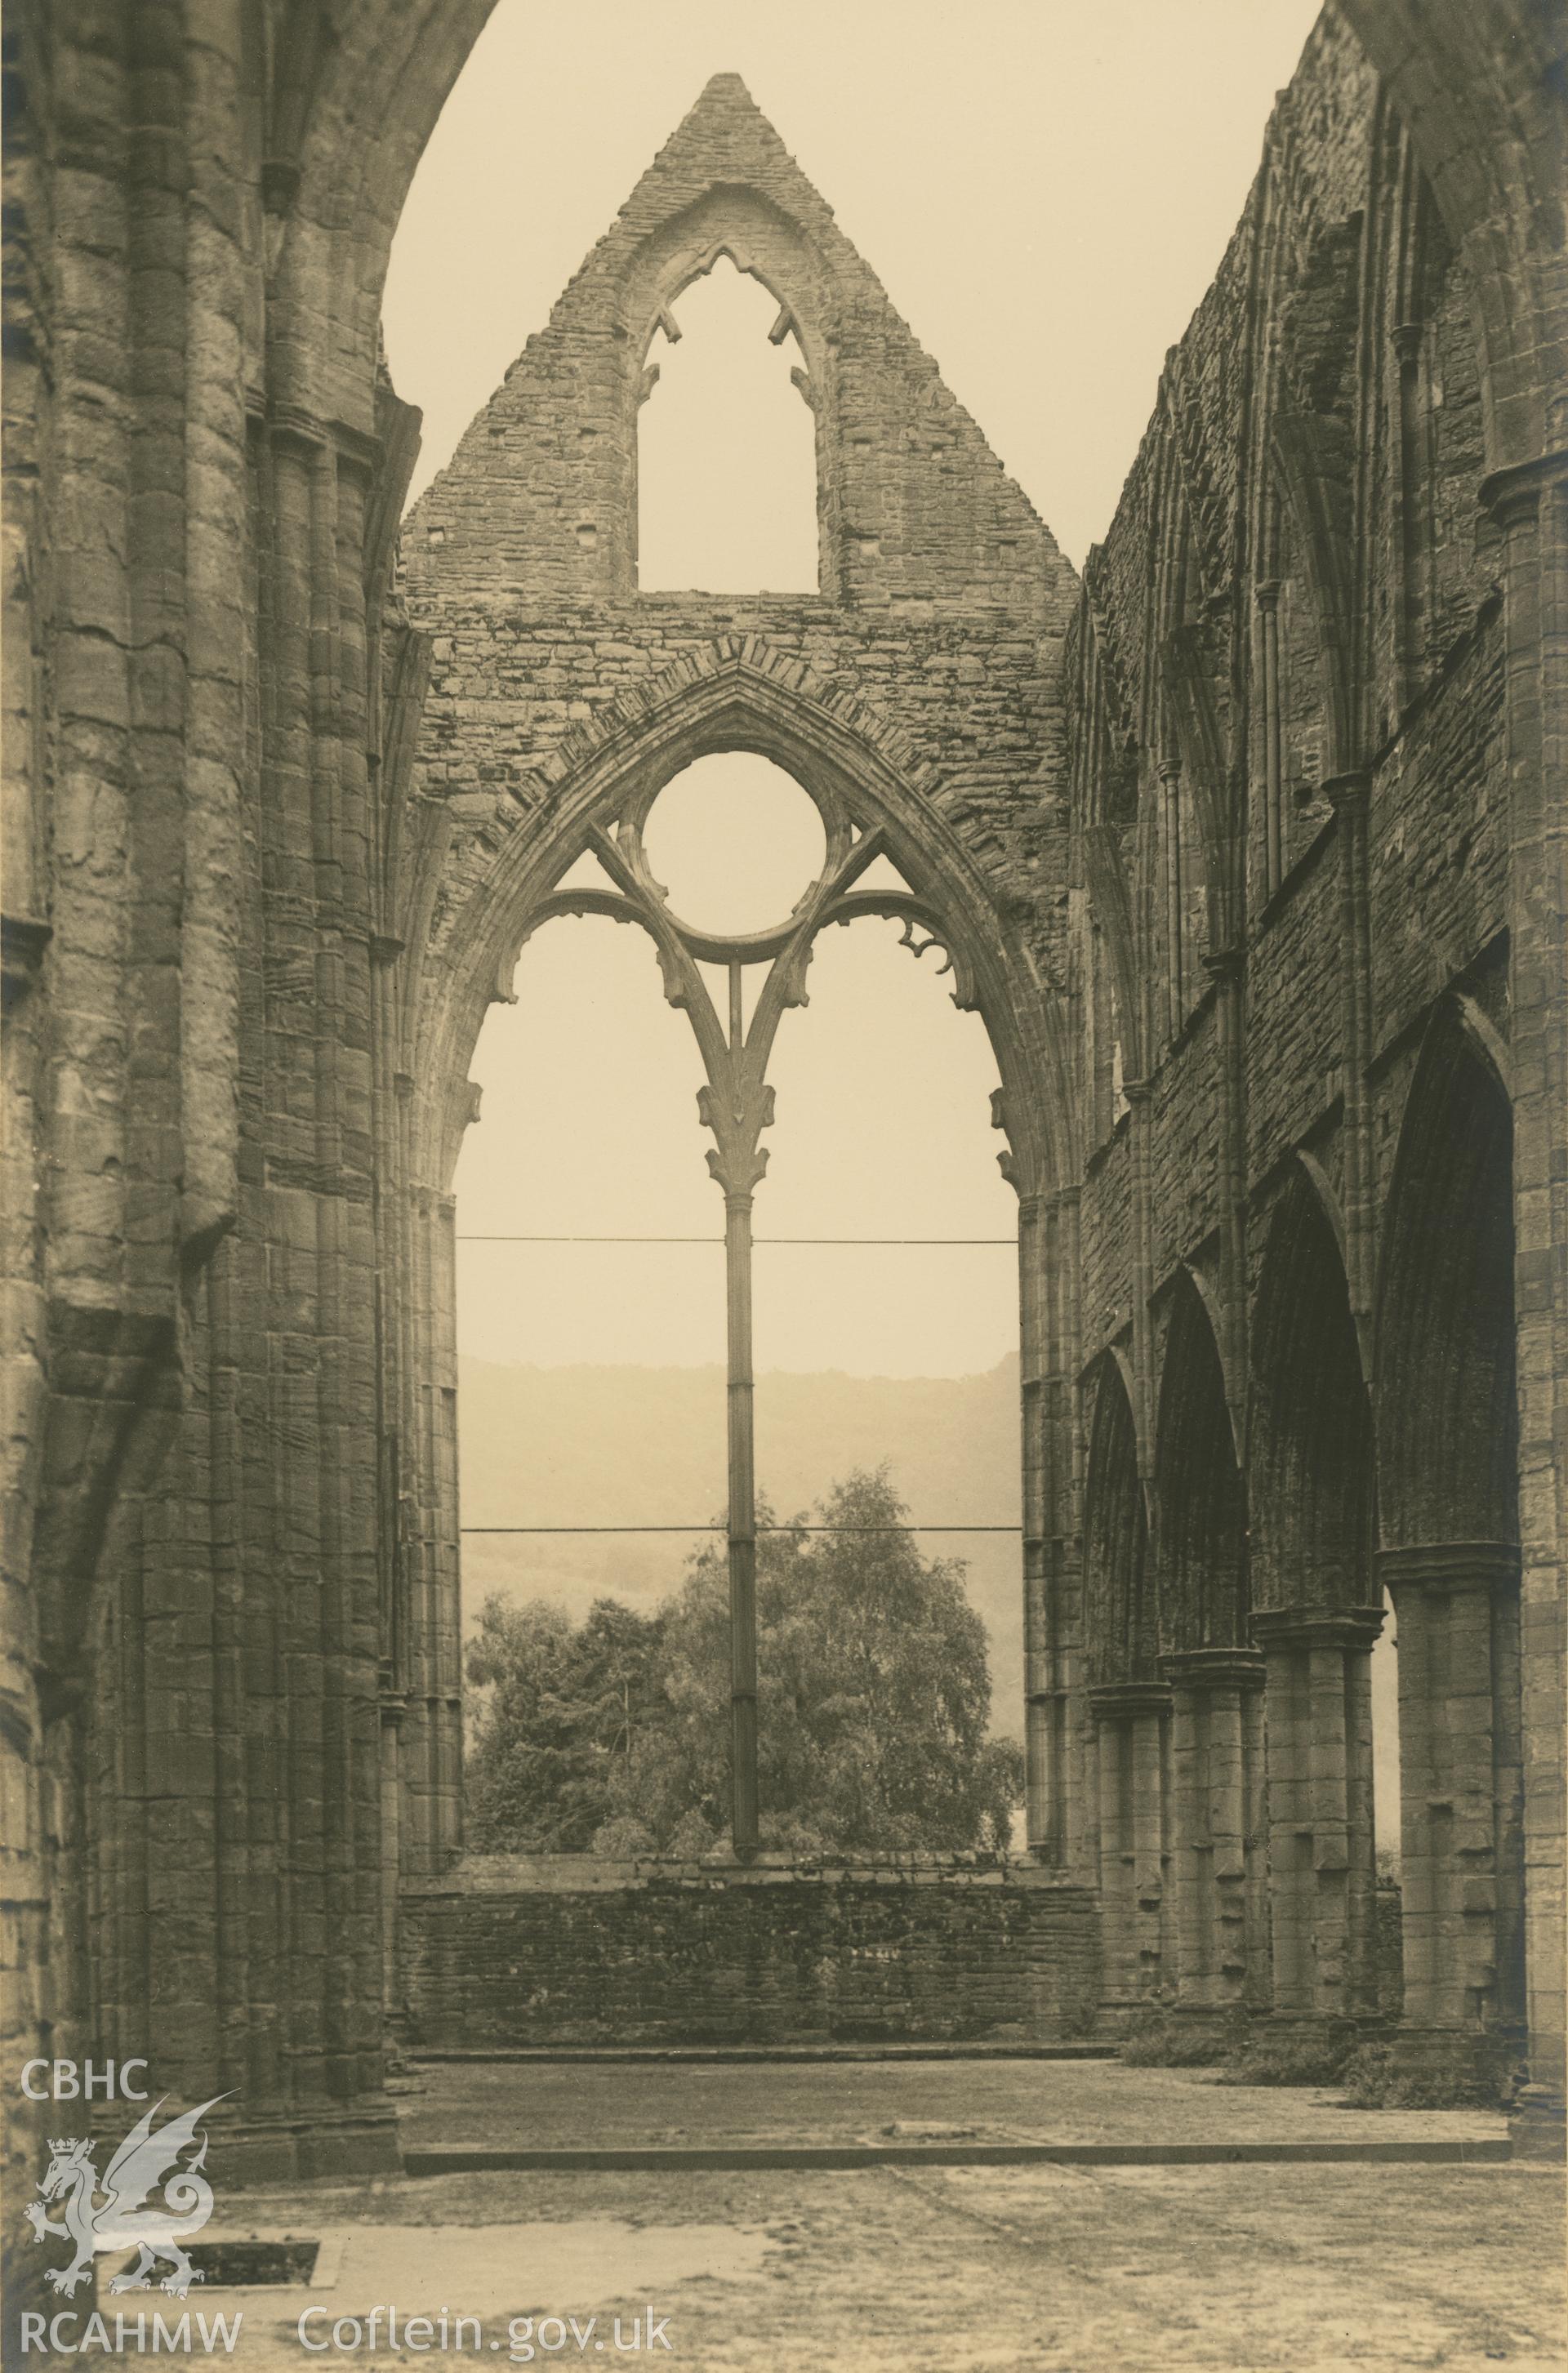 Digital copy of an interior view of Tintern Abbey looking east.